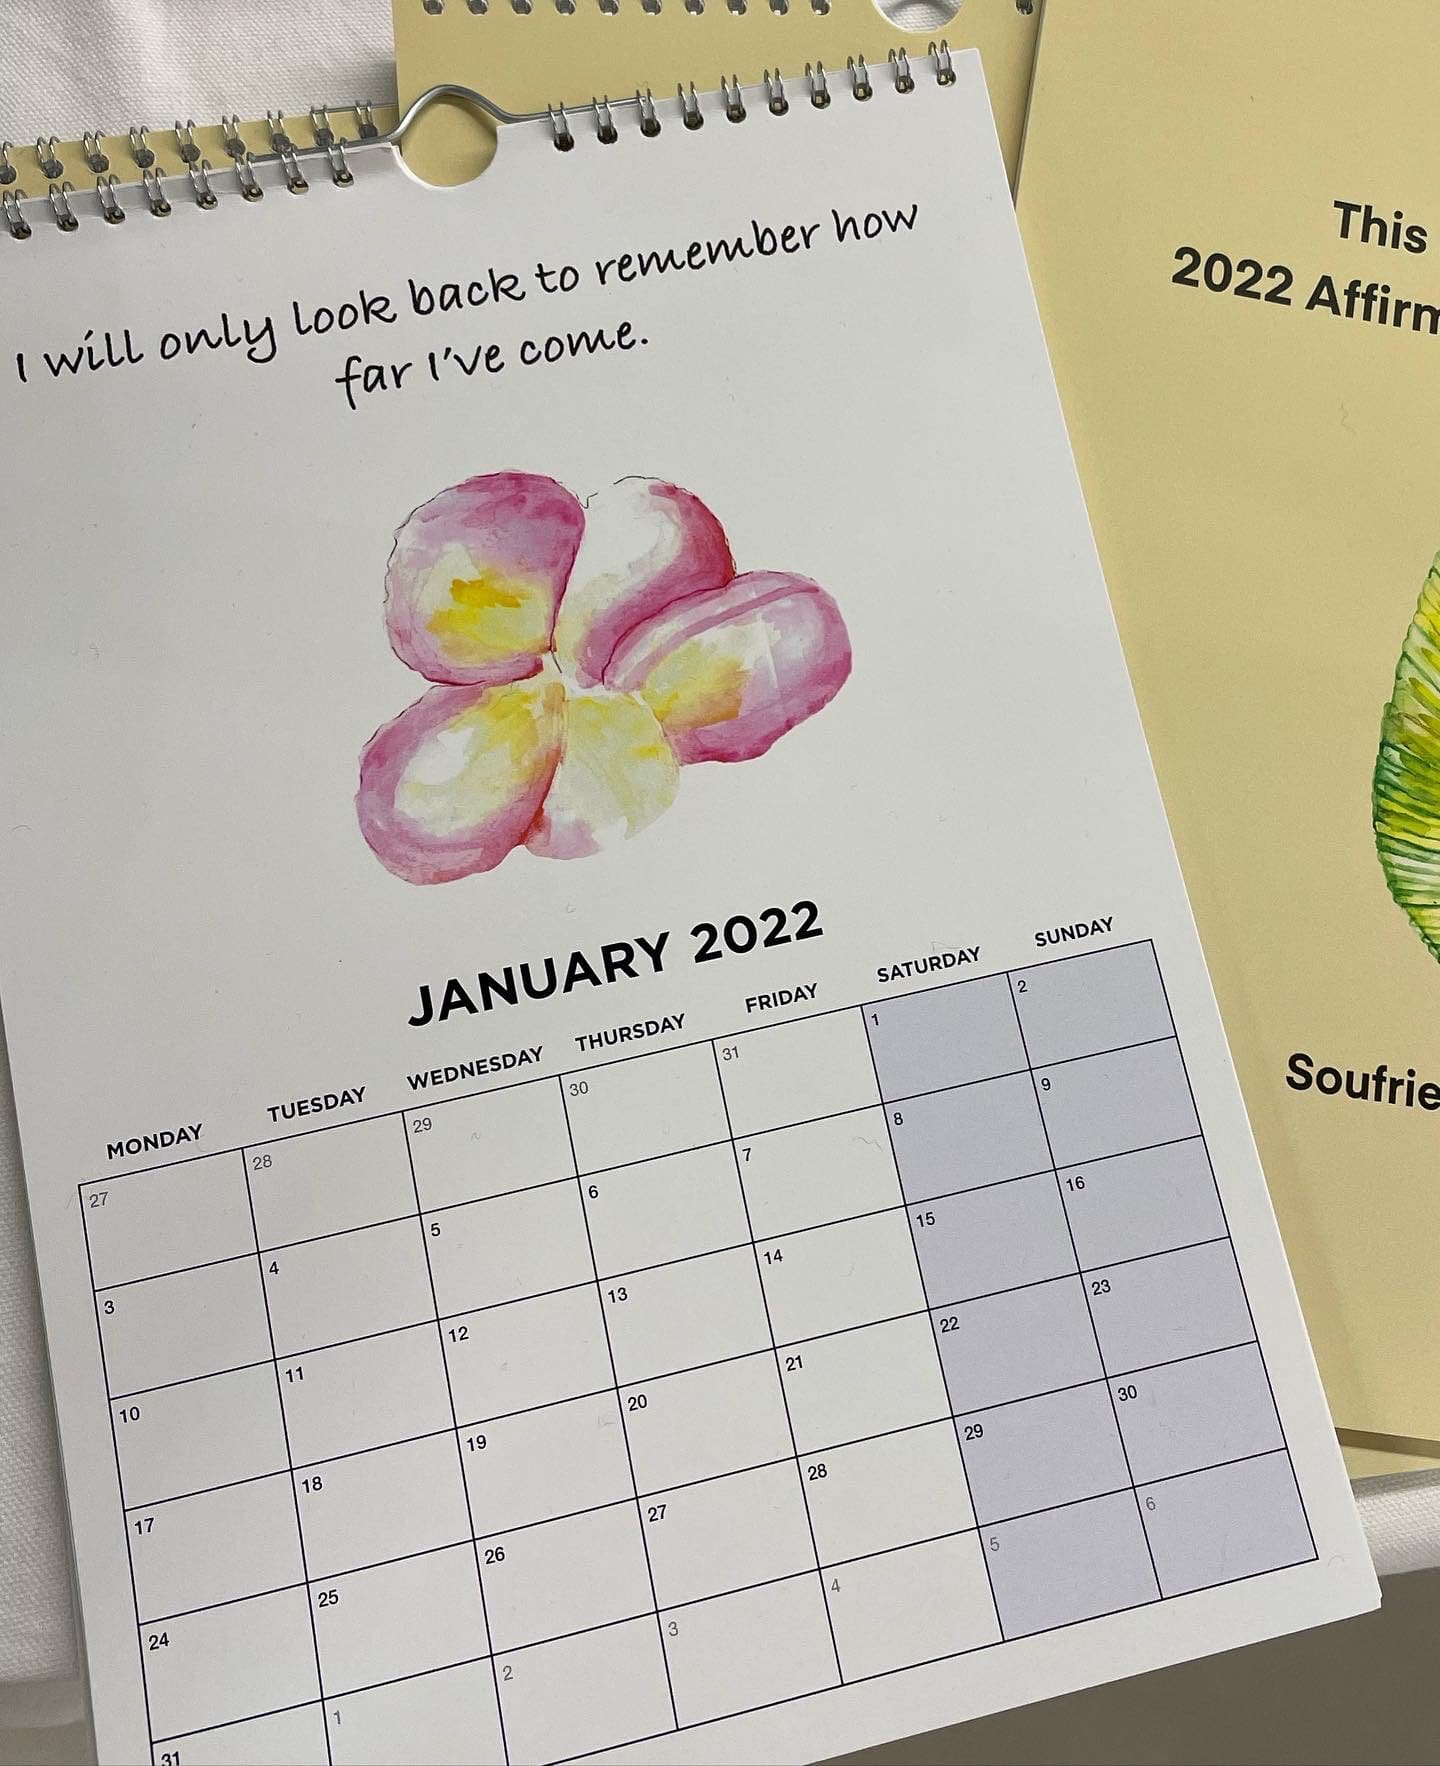 This is your year - 2022 Affirmations Calendar